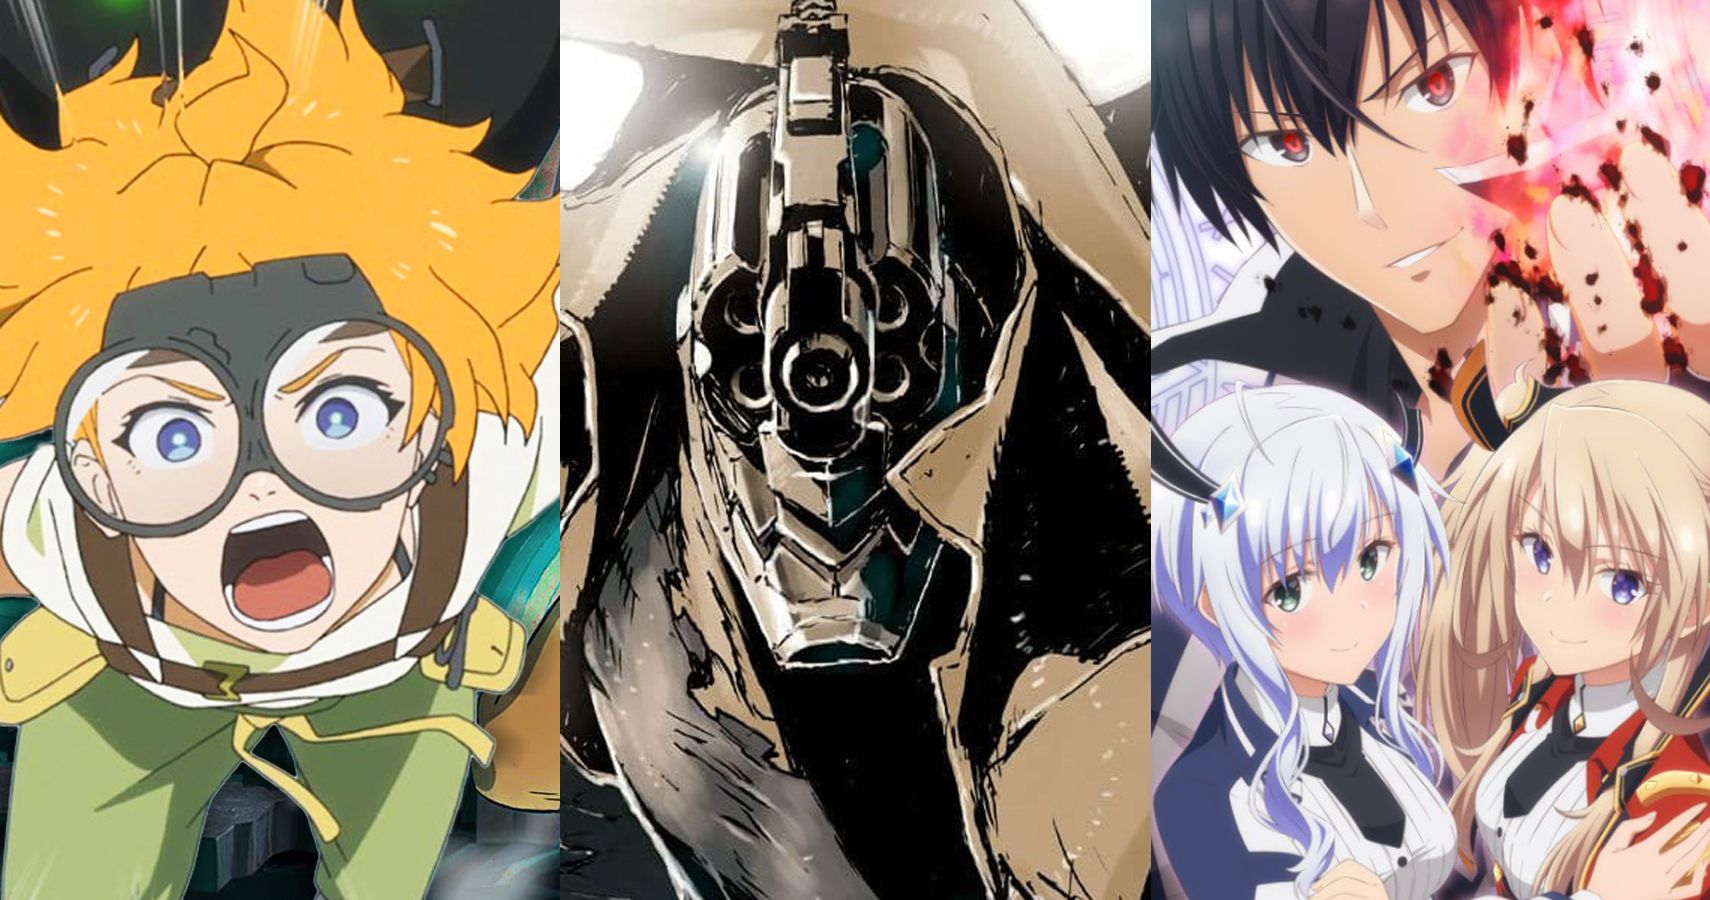 10 Highest-Rated Anime Of Summer 2020, Ranked According To MyAnimeList